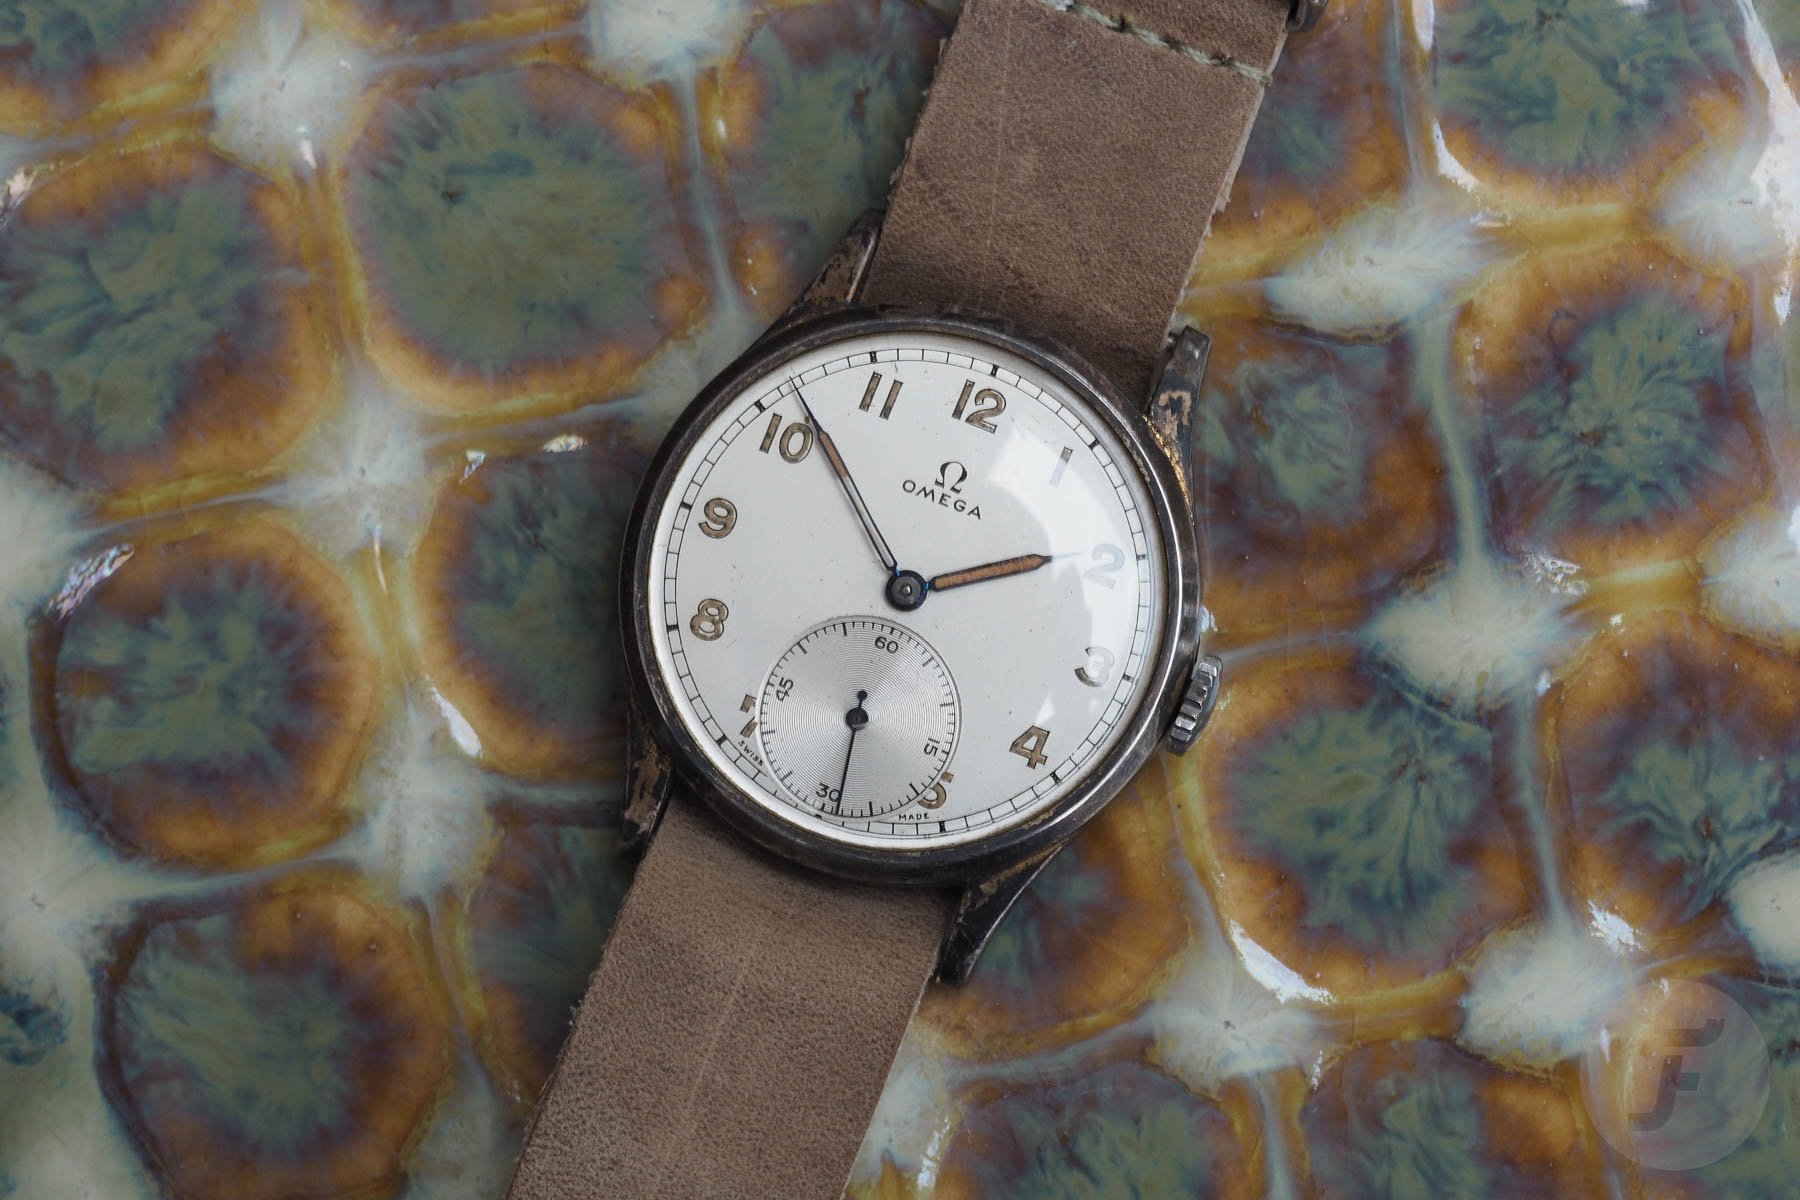 Vintage Watches: An Omega 30T2 With A Sterling Silver Case